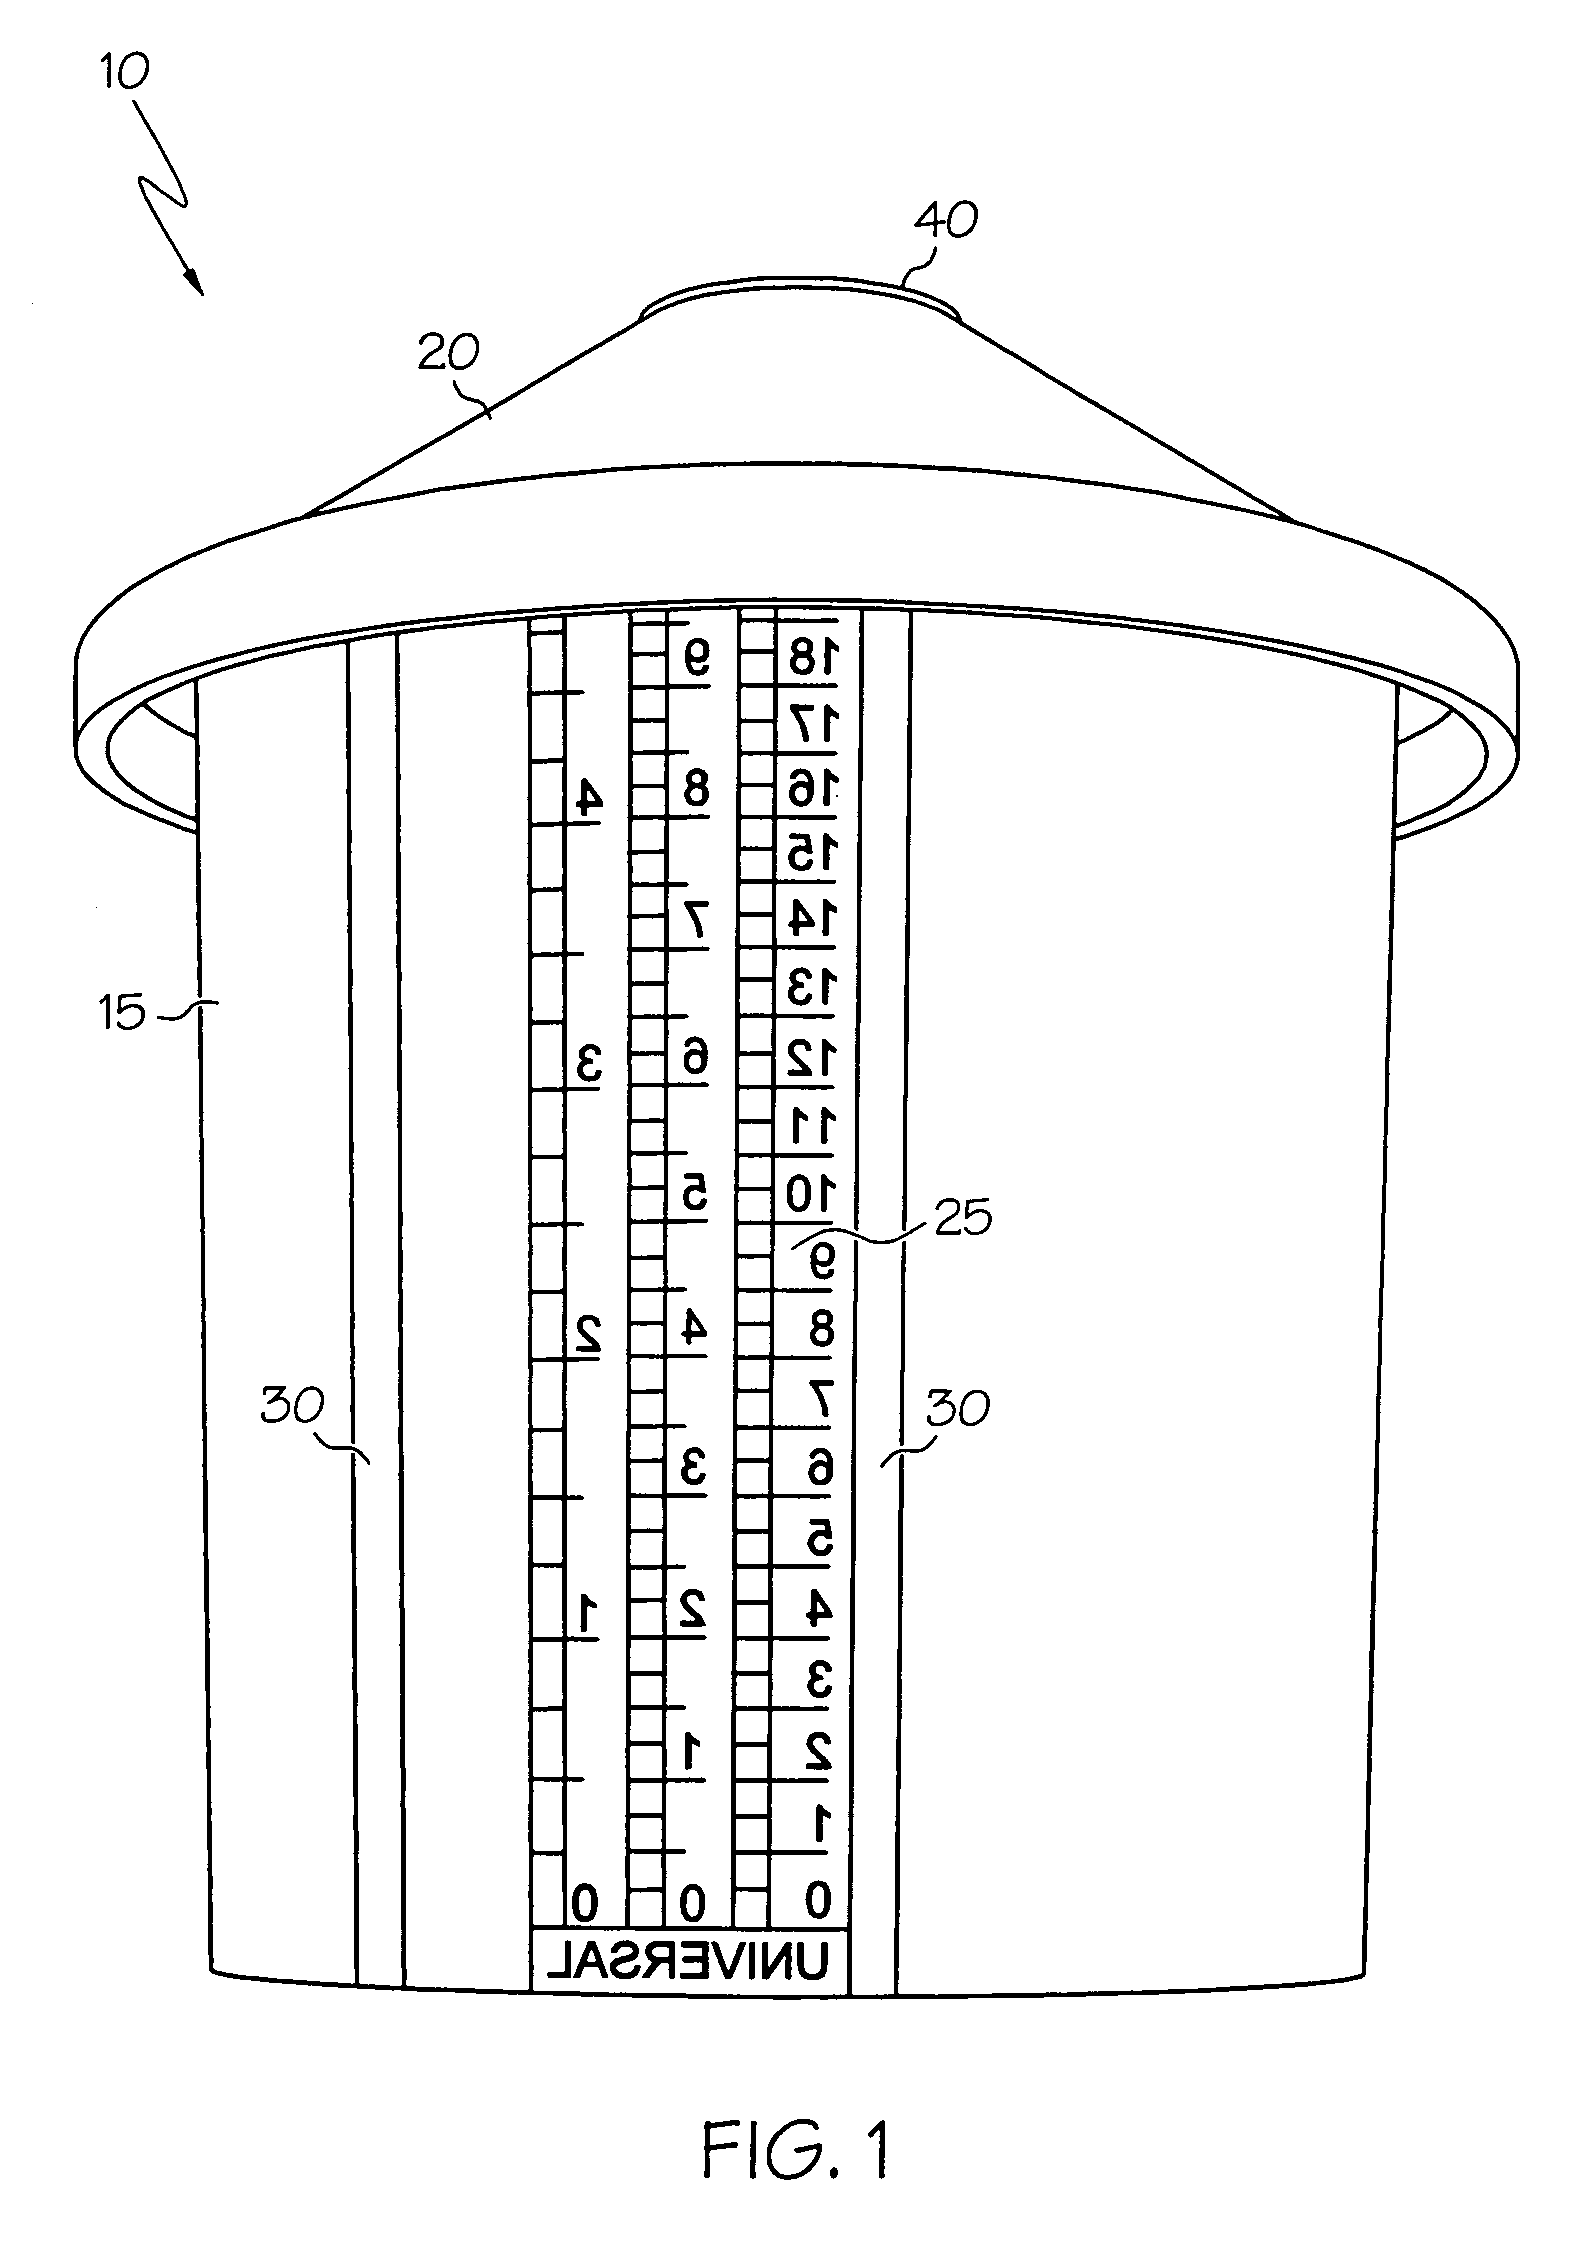 Fluid supply assembly with measuring guide